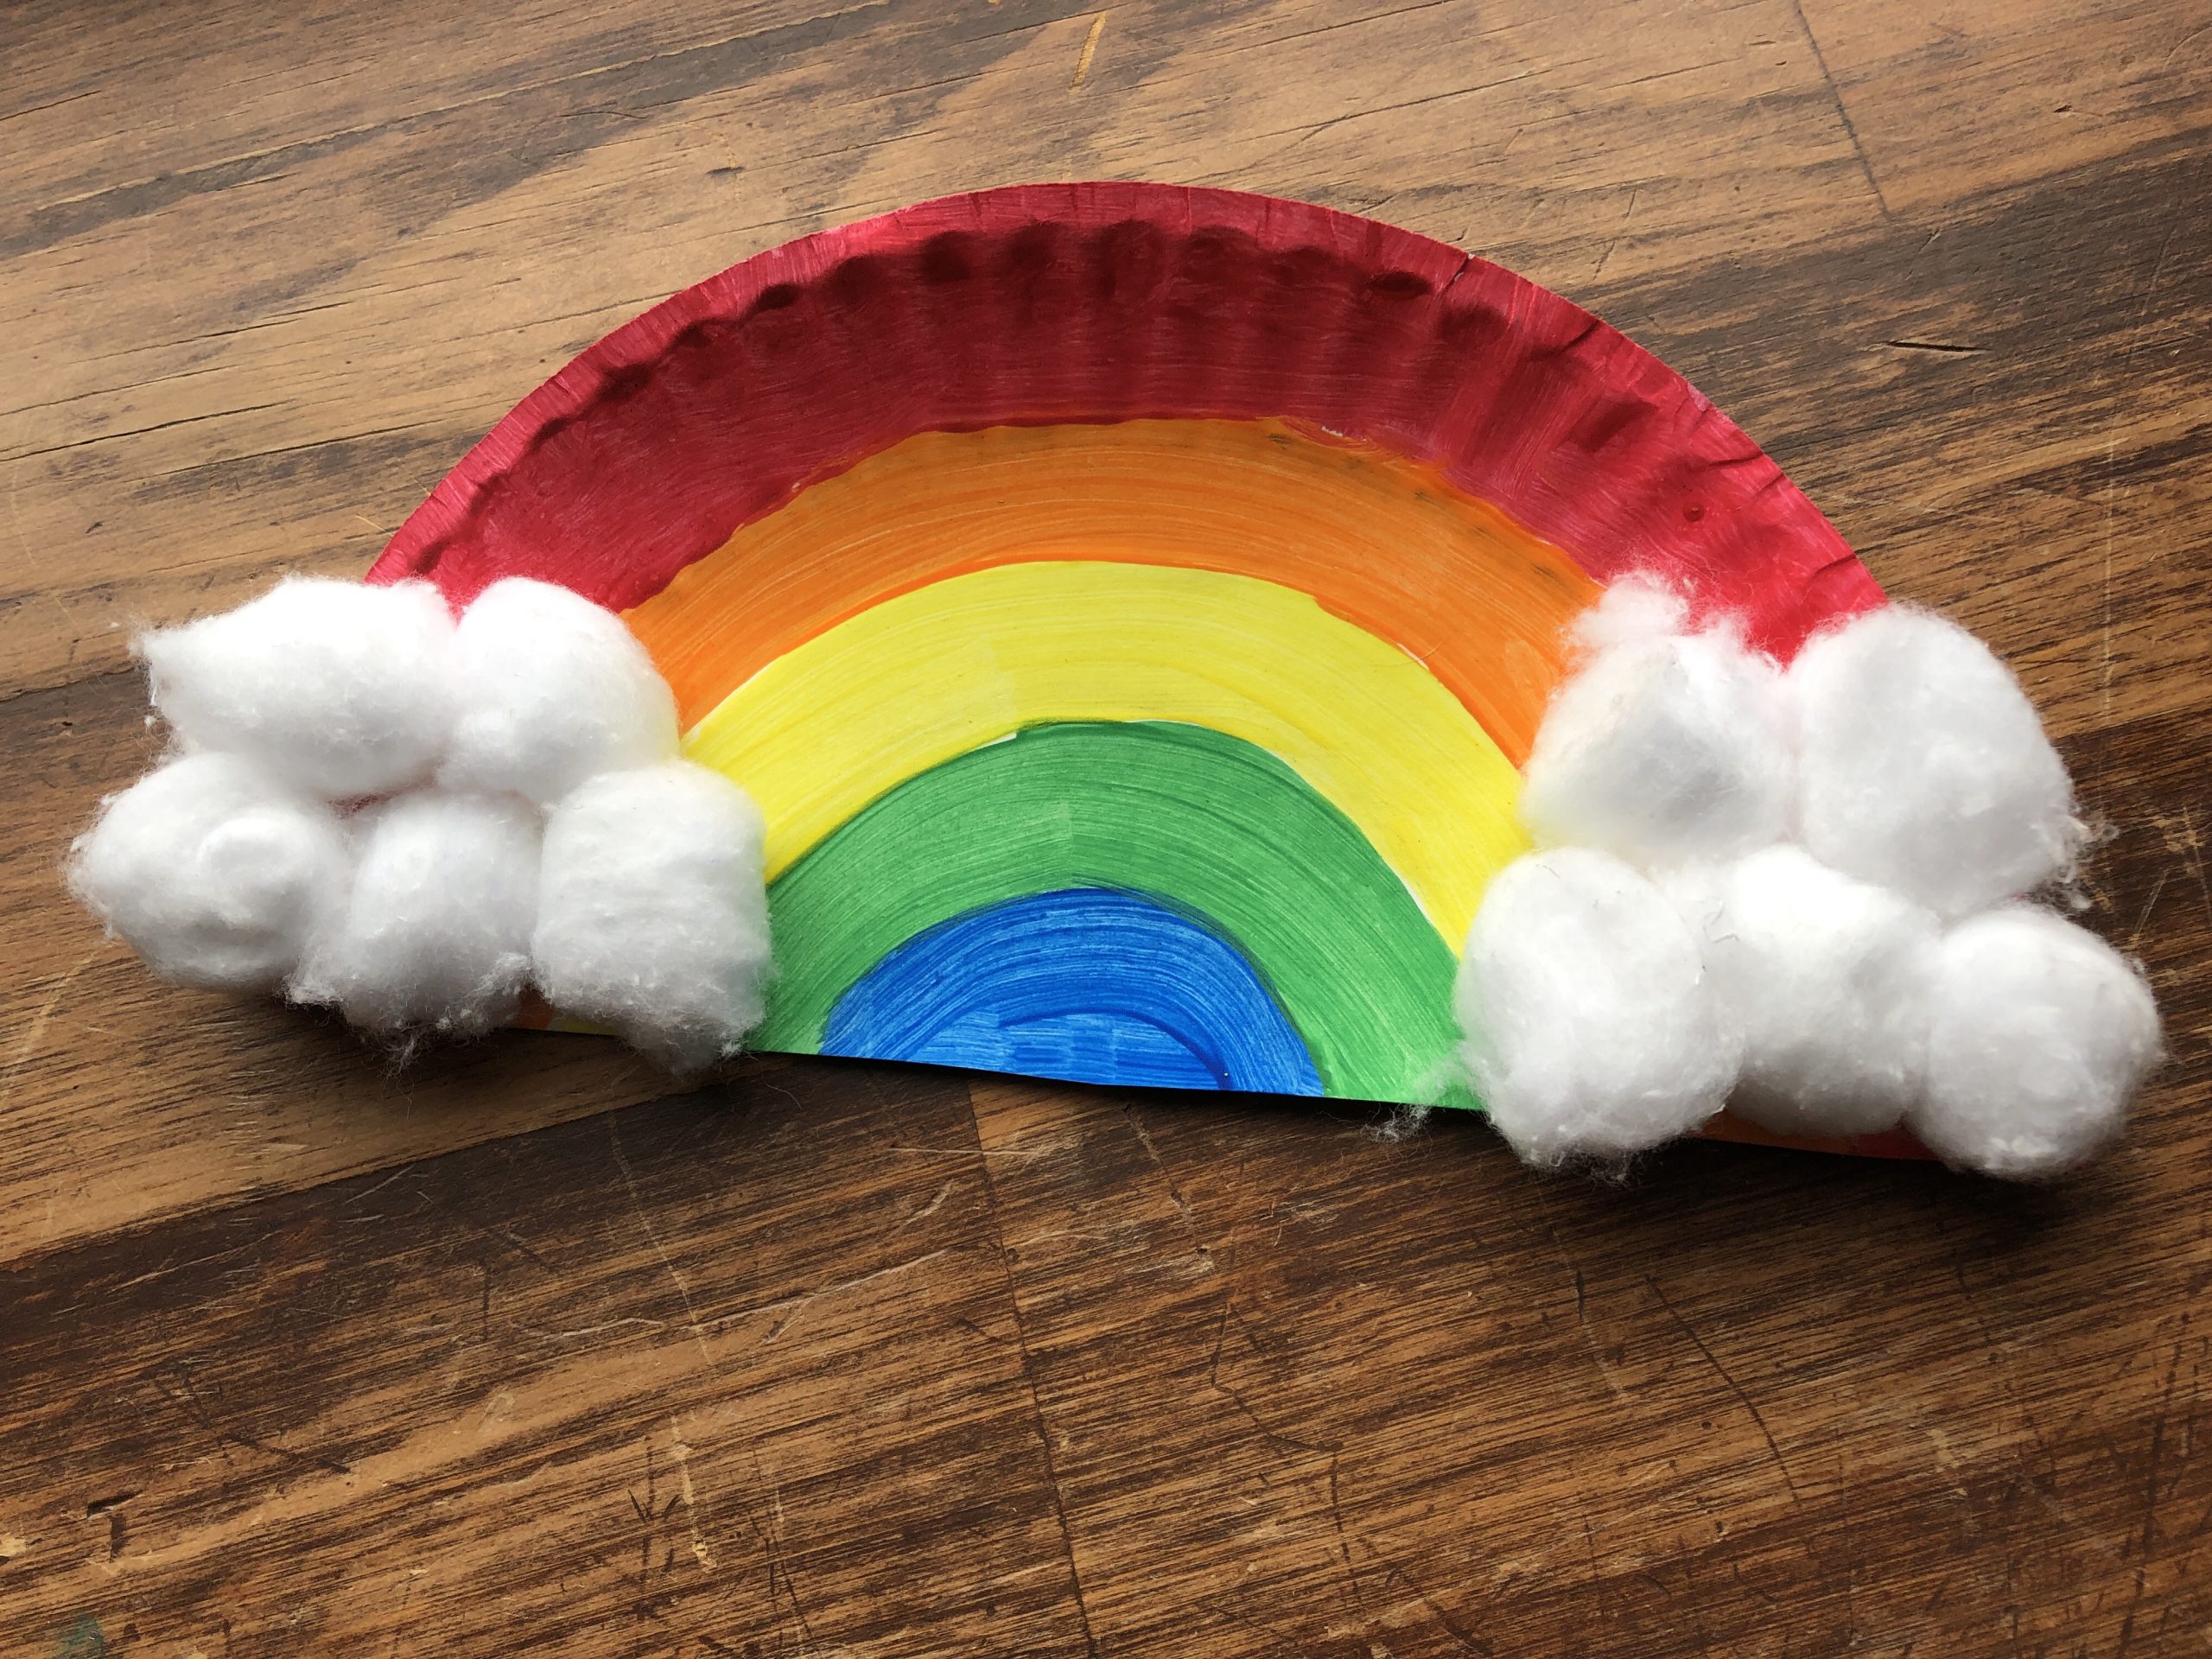 Easy Paper Plate Rainbow Craft - Arty Crafty Kids